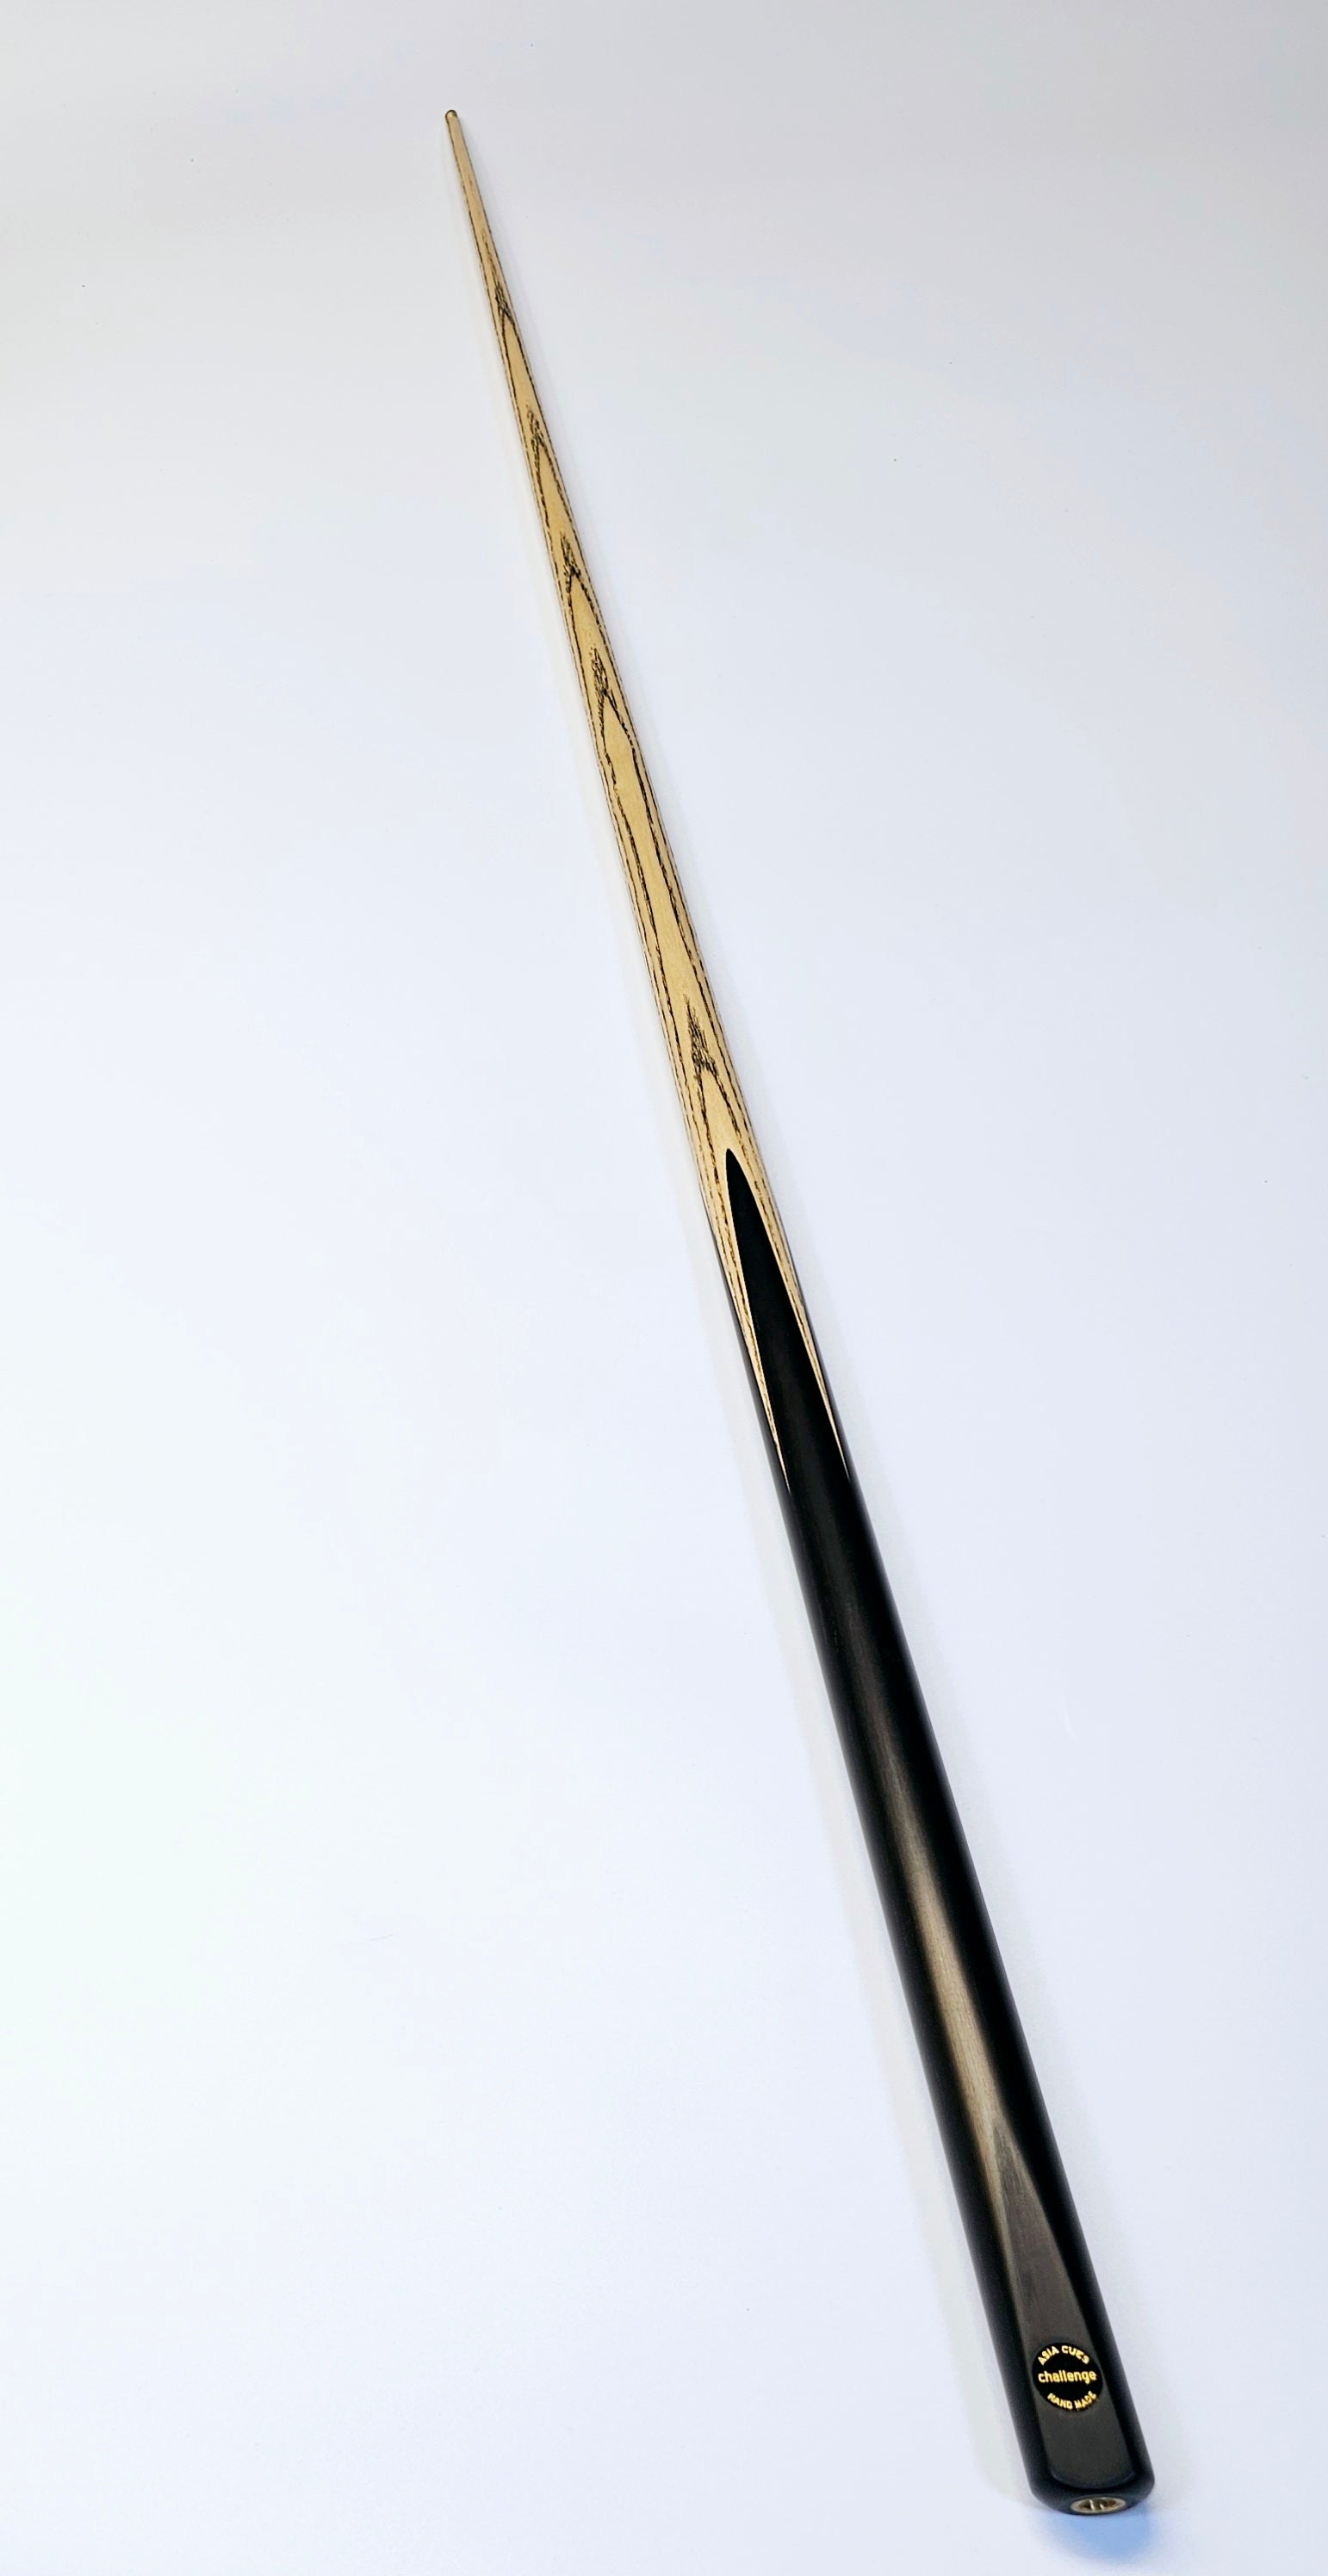 Asia Cues Challenge - One Piece Pool Cue 8.6mm Tip, 17.4oz, 57"